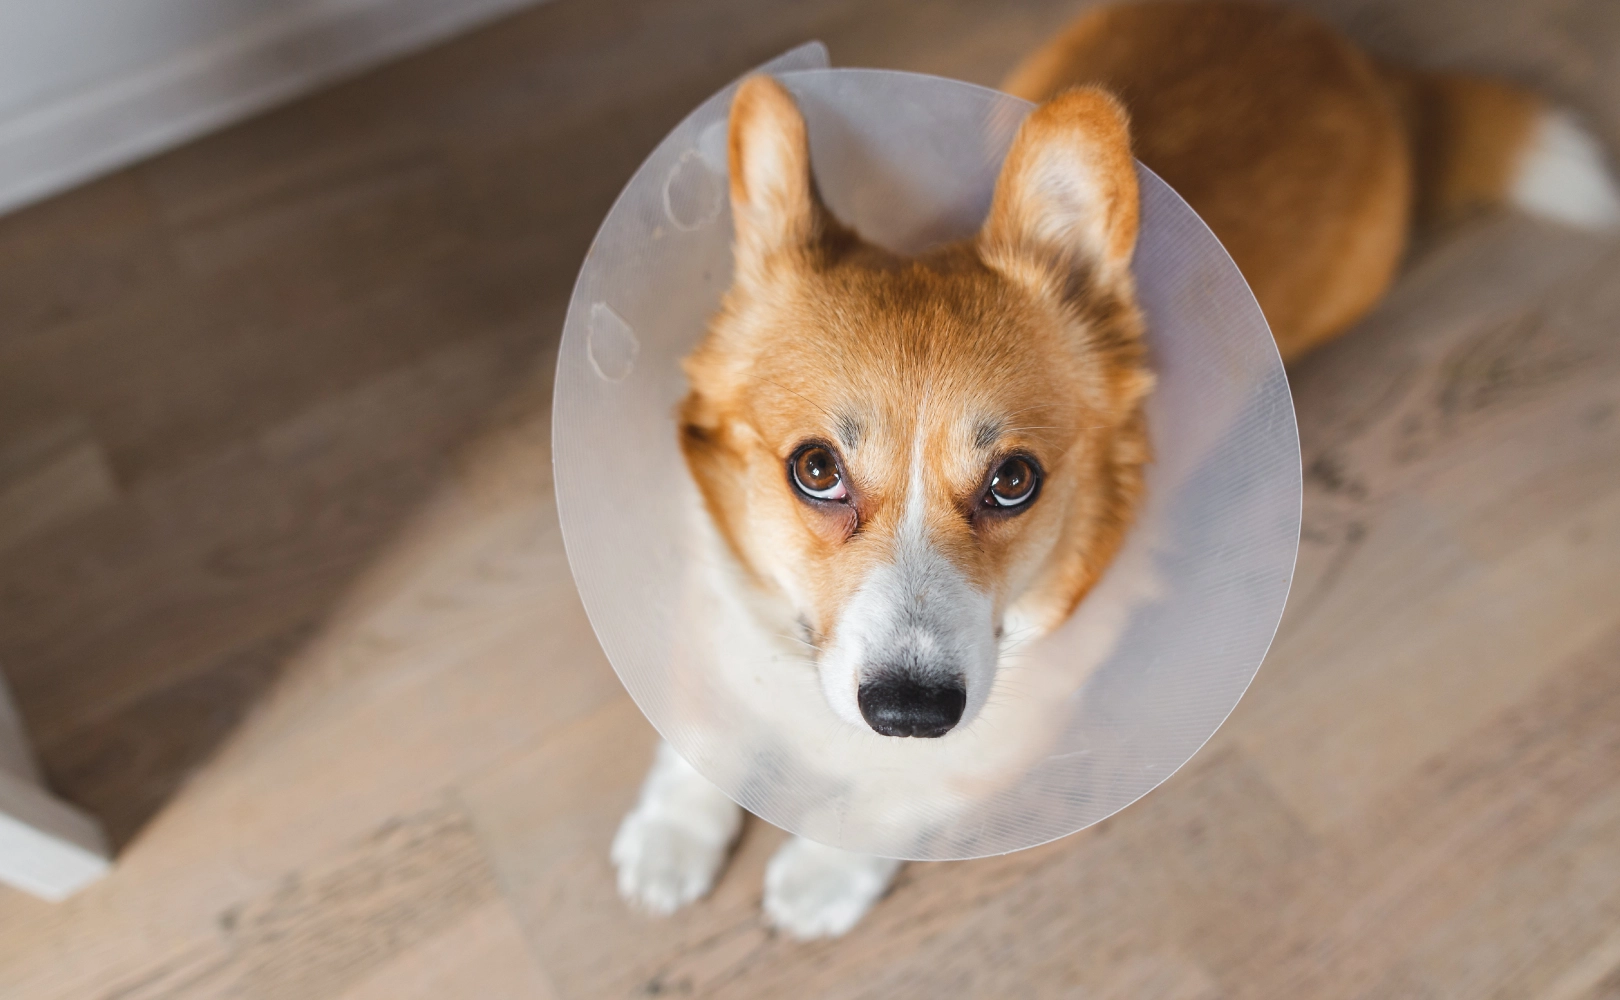 pet dog wearing a vet cone for wellbeing